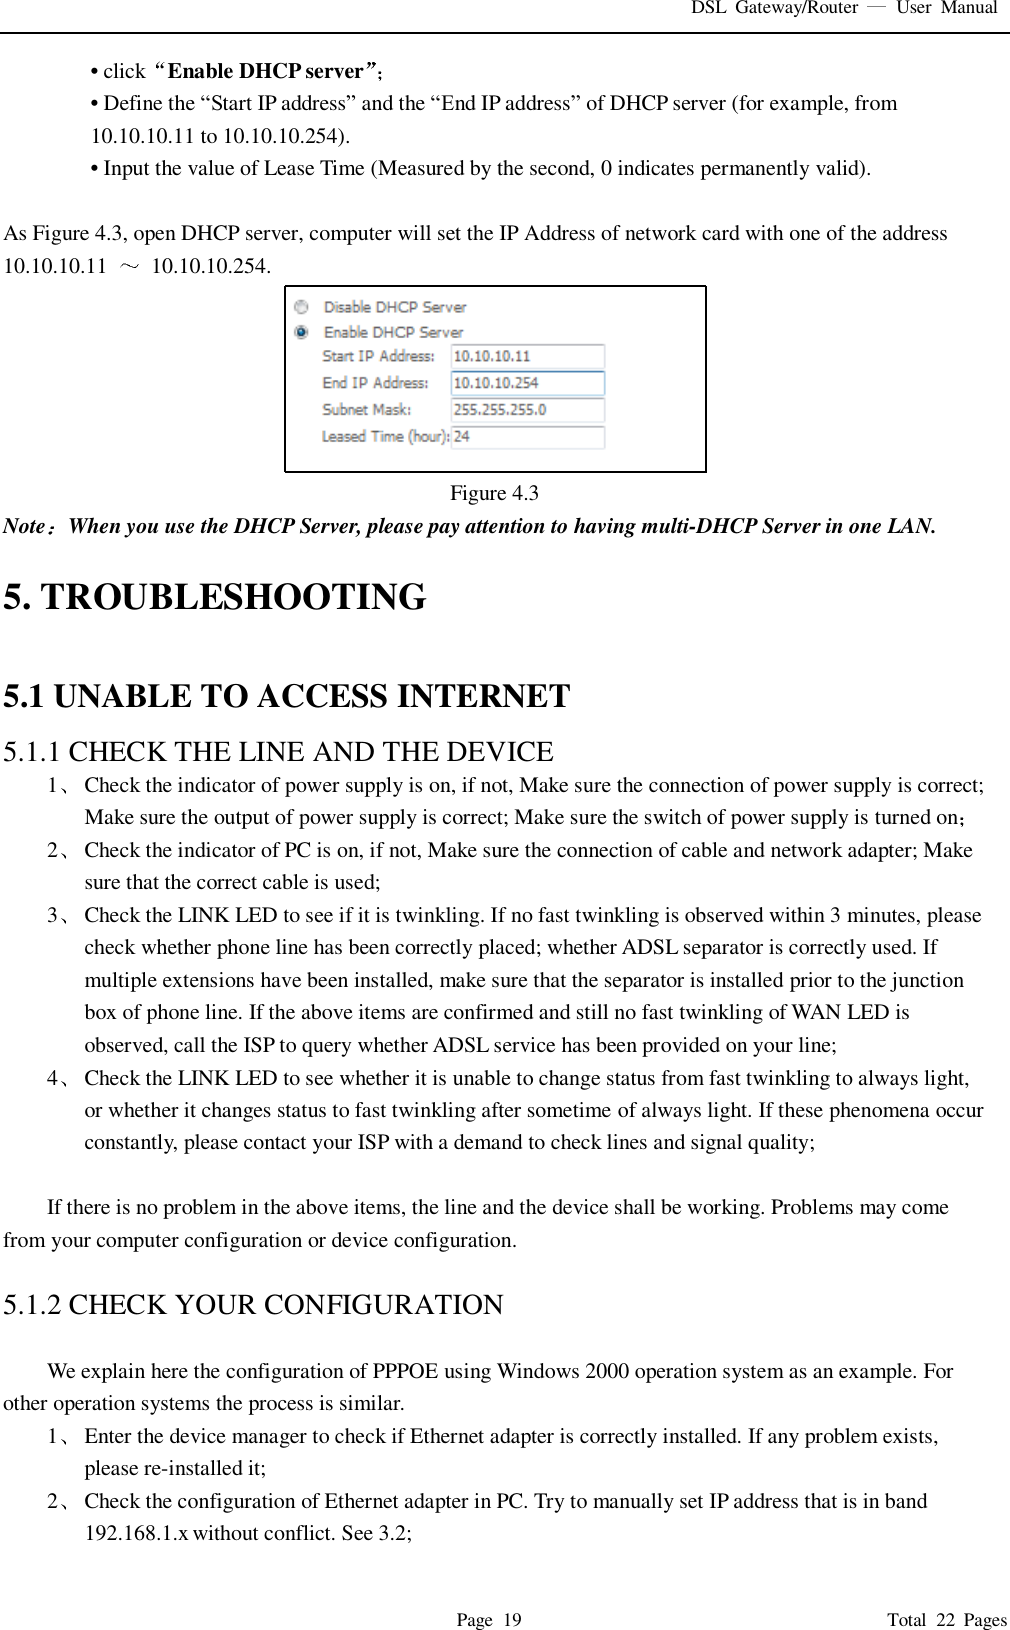 DSL  Gateway/Router    User  Manual   Page  19                                                                              Total  22  Pages • click Enable DHCP server  • Define the “Start IP address” and the “End IP address” of DHCP server (for example, from 10.10.10.11 to 10.10.10.254).   • Input the value of Lease Time (Measured by the second, 0 indicates permanently valid).    As Figure 4.3, open DHCP server, computer will set the IP Address of network card with one of the address   10.10.10.11    10.10.10.254.  Figure 4.3 Note When you use the DHCP Server, please pay attention to having multi-DHCP Server in one LAN.    5. TROUBLESHOOTING  5.1 UNABLE TO ACCESS INTERNET 5.1.1 CHECK THE LINE AND THE DEVICE 1 Check the indicator of power supply is on, if not, Make sure the connection of power supply is correct; Make sure the output of power supply is correct; Make sure the switch of power supply is turned on  2 Check the indicator of PC is on, if not, Make sure the connection of cable and network adapter; Make sure that the correct cable is used; 3 Check the LINK LED to see if it is twinkling. If no fast twinkling is observed within 3 minutes, please check whether phone line has been correctly placed; whether ADSL separator is correctly used. If multiple extensions have been installed, make sure that the separator is installed prior to the junction box of phone line. If the above items are confirmed and still no fast twinkling of WAN LED is observed, call the ISP to query whether ADSL service has been provided on your line; 4 Check the LINK LED to see whether it is unable to change status from fast twinkling to always light, or whether it changes status to fast twinkling after sometime of always light. If these phenomena occur constantly, please contact your ISP with a demand to check lines and signal quality;  If there is no problem in the above items, the line and the device shall be working. Problems may come from your computer configuration or device configuration.  5.1.2 CHECK YOUR CONFIGURATION  We explain here the configuration of PPPOE using Windows 2000 operation system as an example. For other operation systems the process is similar. 1 Enter the device manager to check if Ethernet adapter is correctly installed. If any problem exists, please re-installed it; 2 Check the configuration of Ethernet adapter in PC. Try to manually set IP address that is in band 192.168.1.x without conflict. See 3.2; 